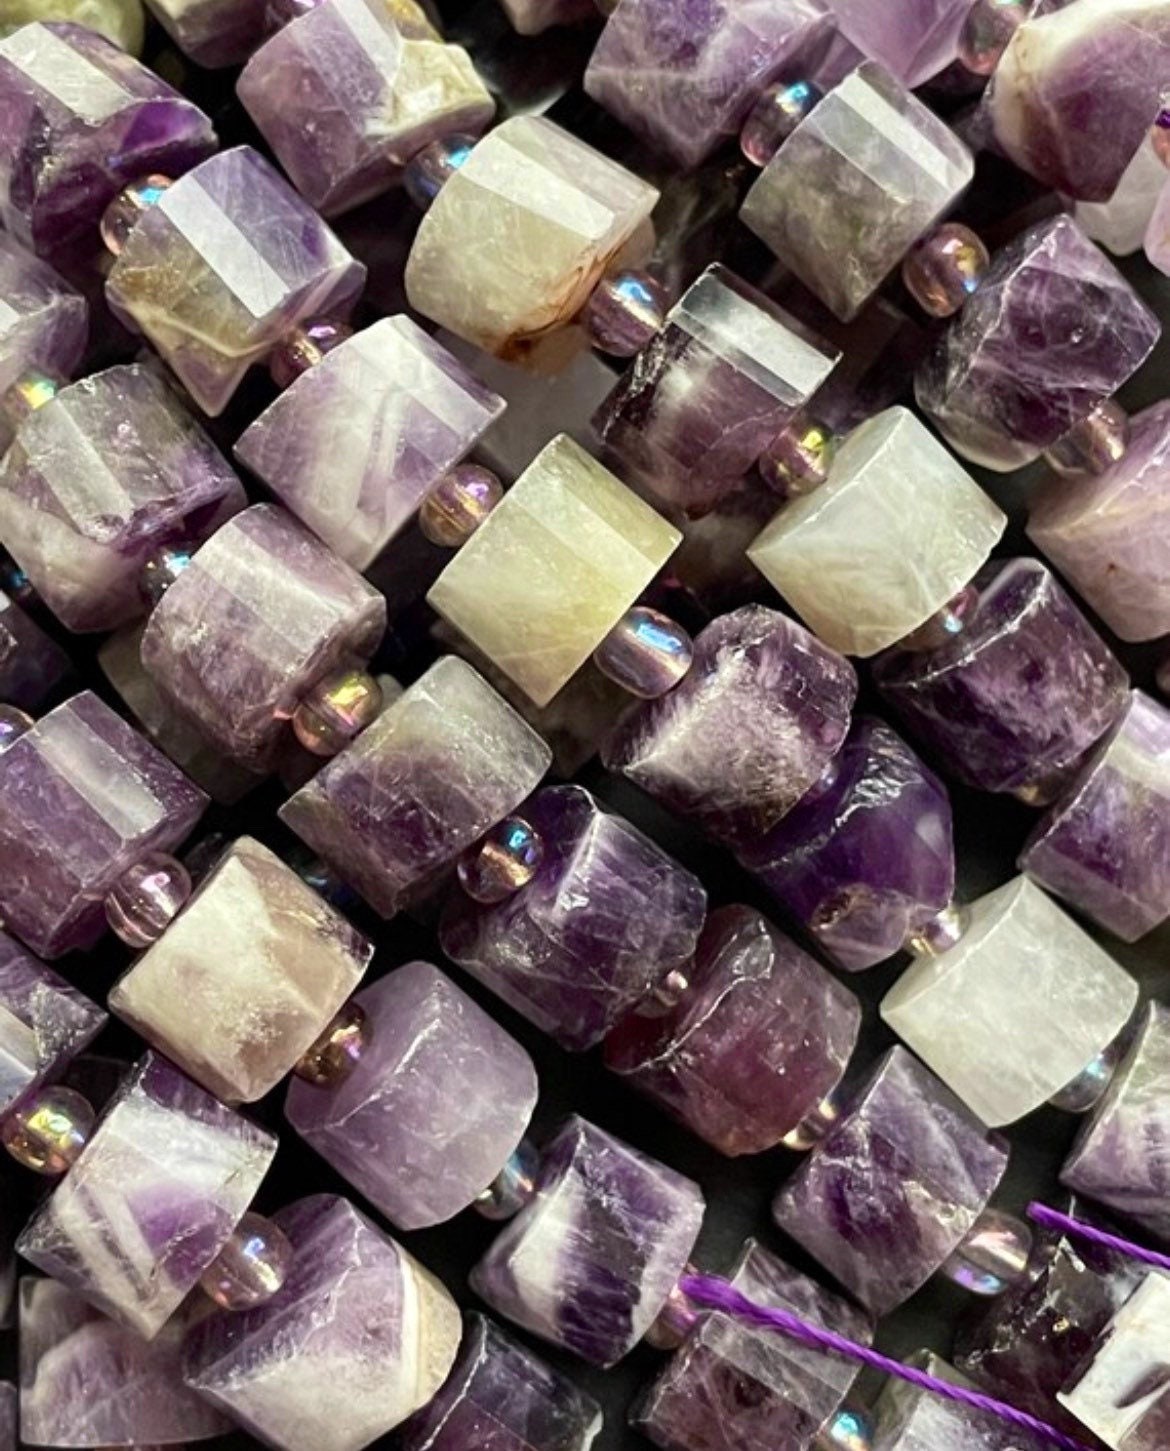 Natural Flower Amethyst Gemstone Bead Faceted 8x10mm Rondelle Wheel Shape, Beautiful Natural Purple White Amethyst Gemstone Bead